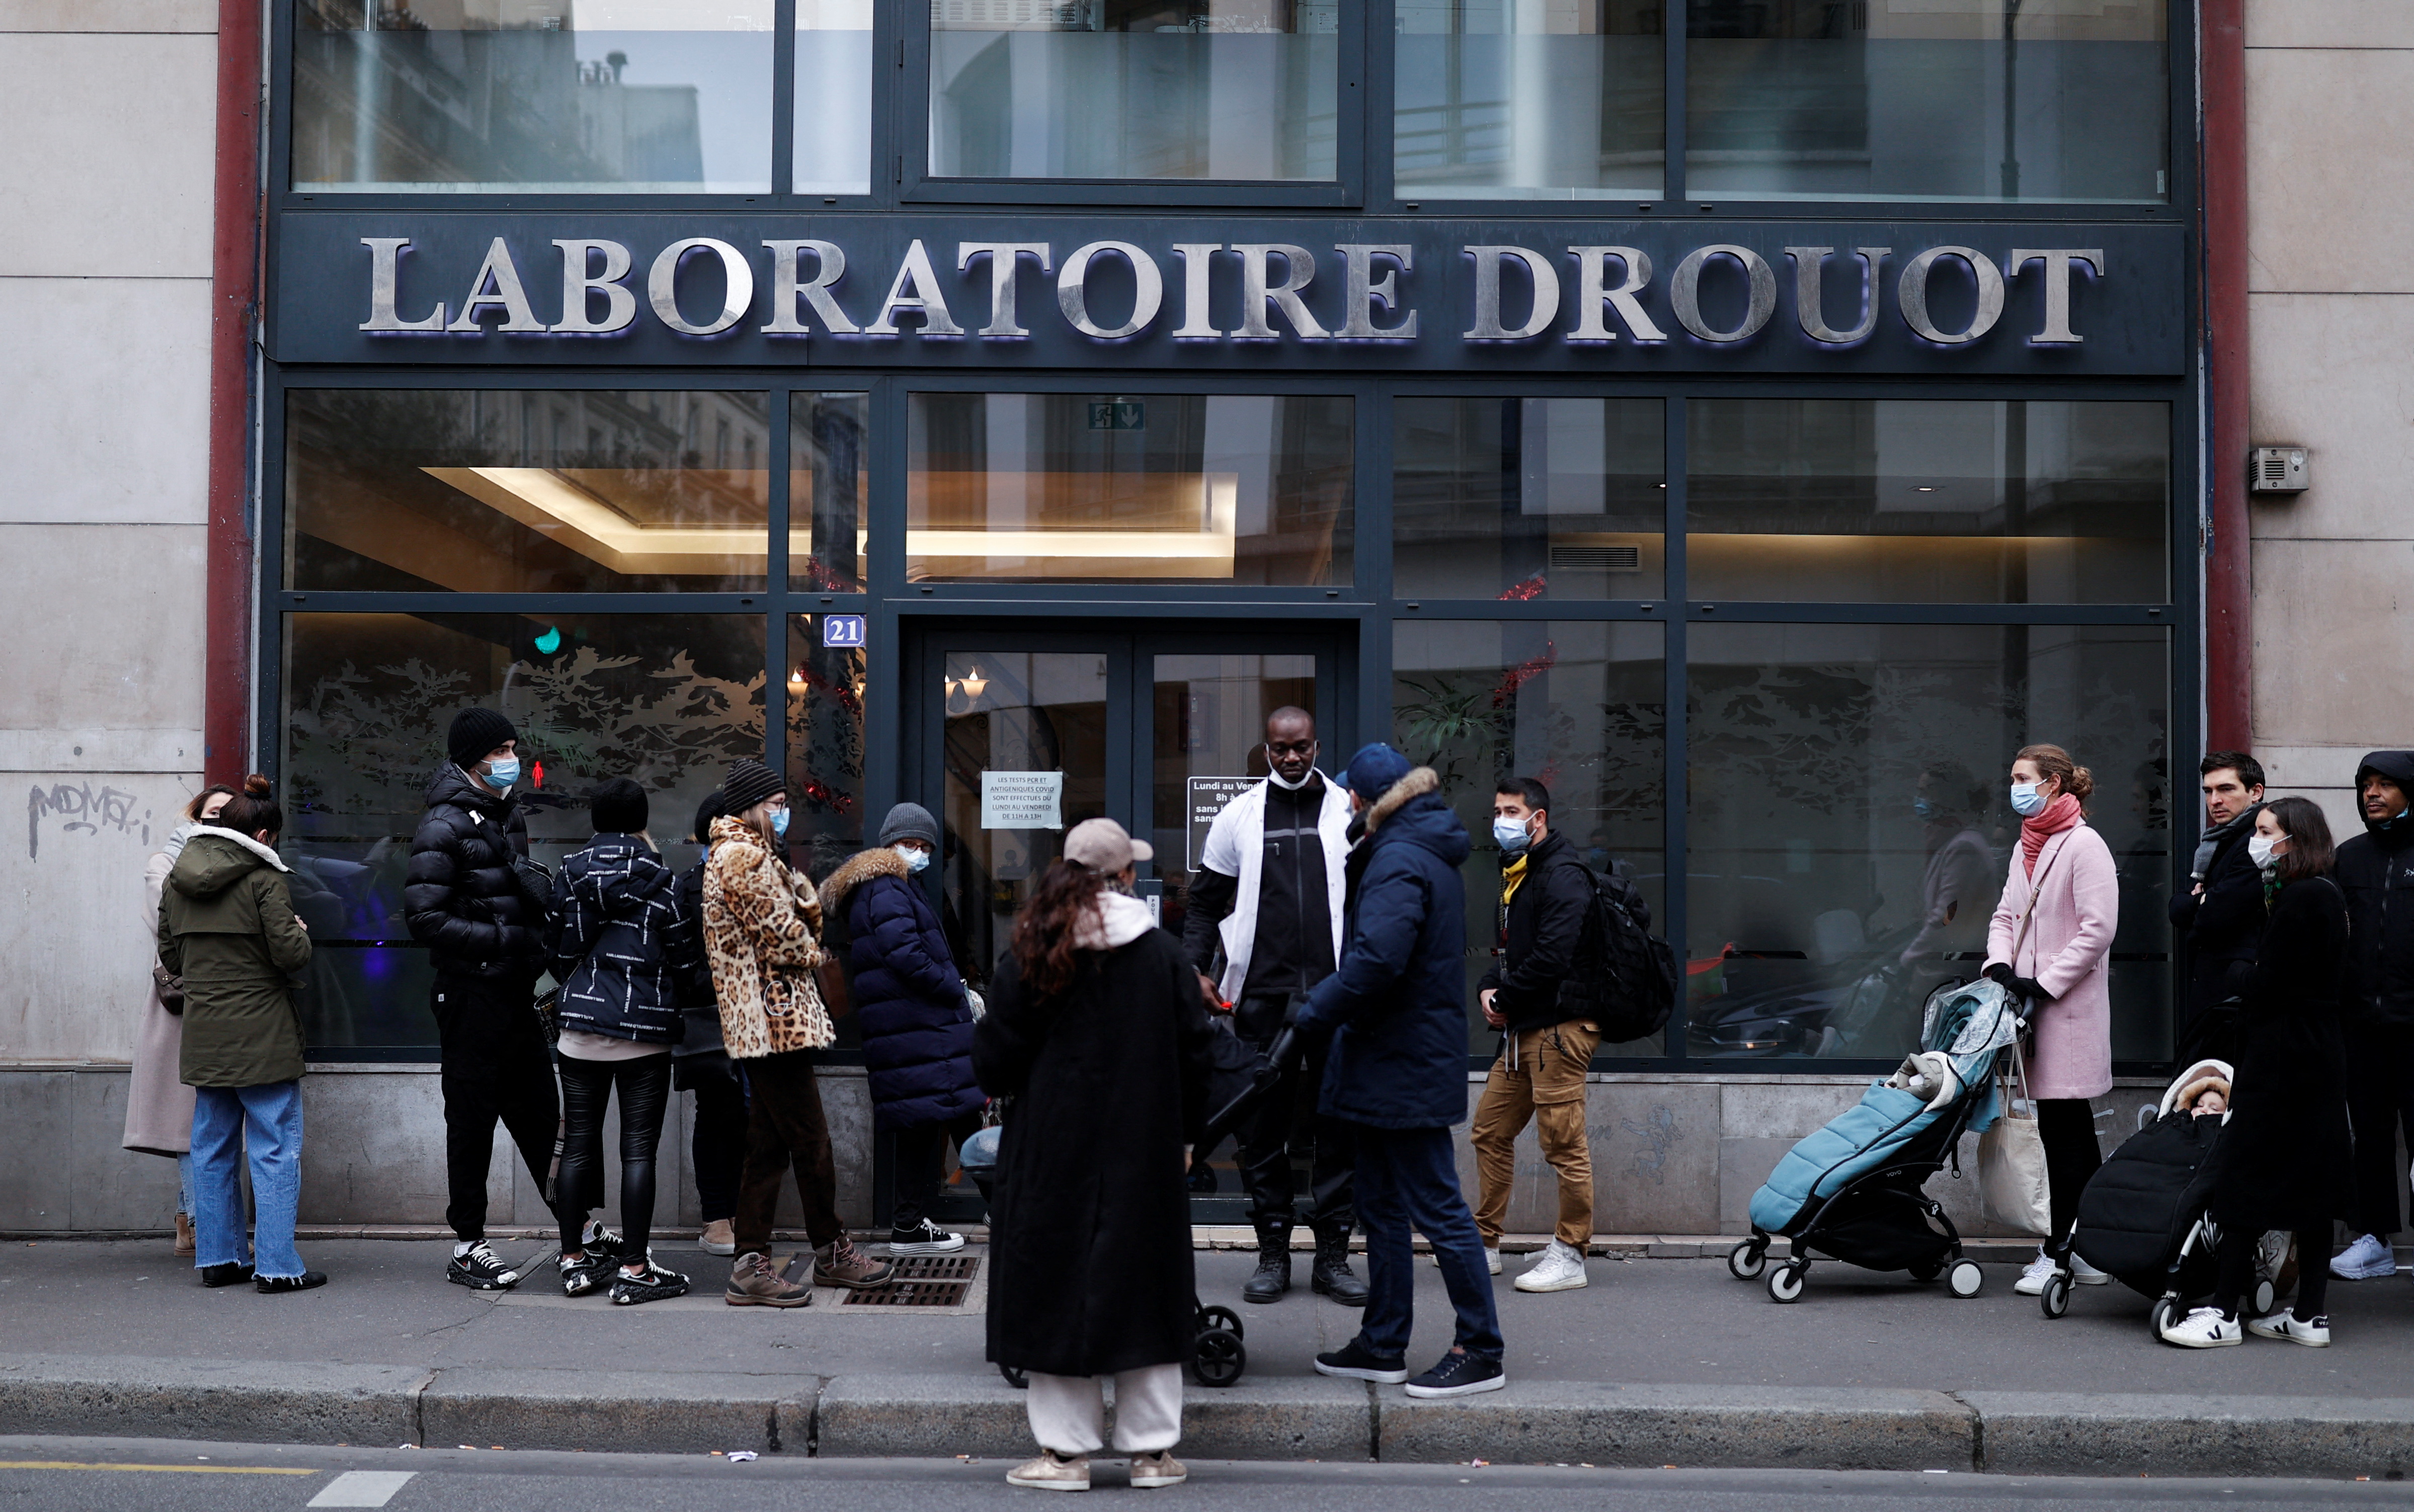 People queue for tests ahead of Christmas, amid the spread of the coronavirus disease (COVID-19) pandemic, in Paris, France, December 23, 2021. REUTERS/Christian Hartmann